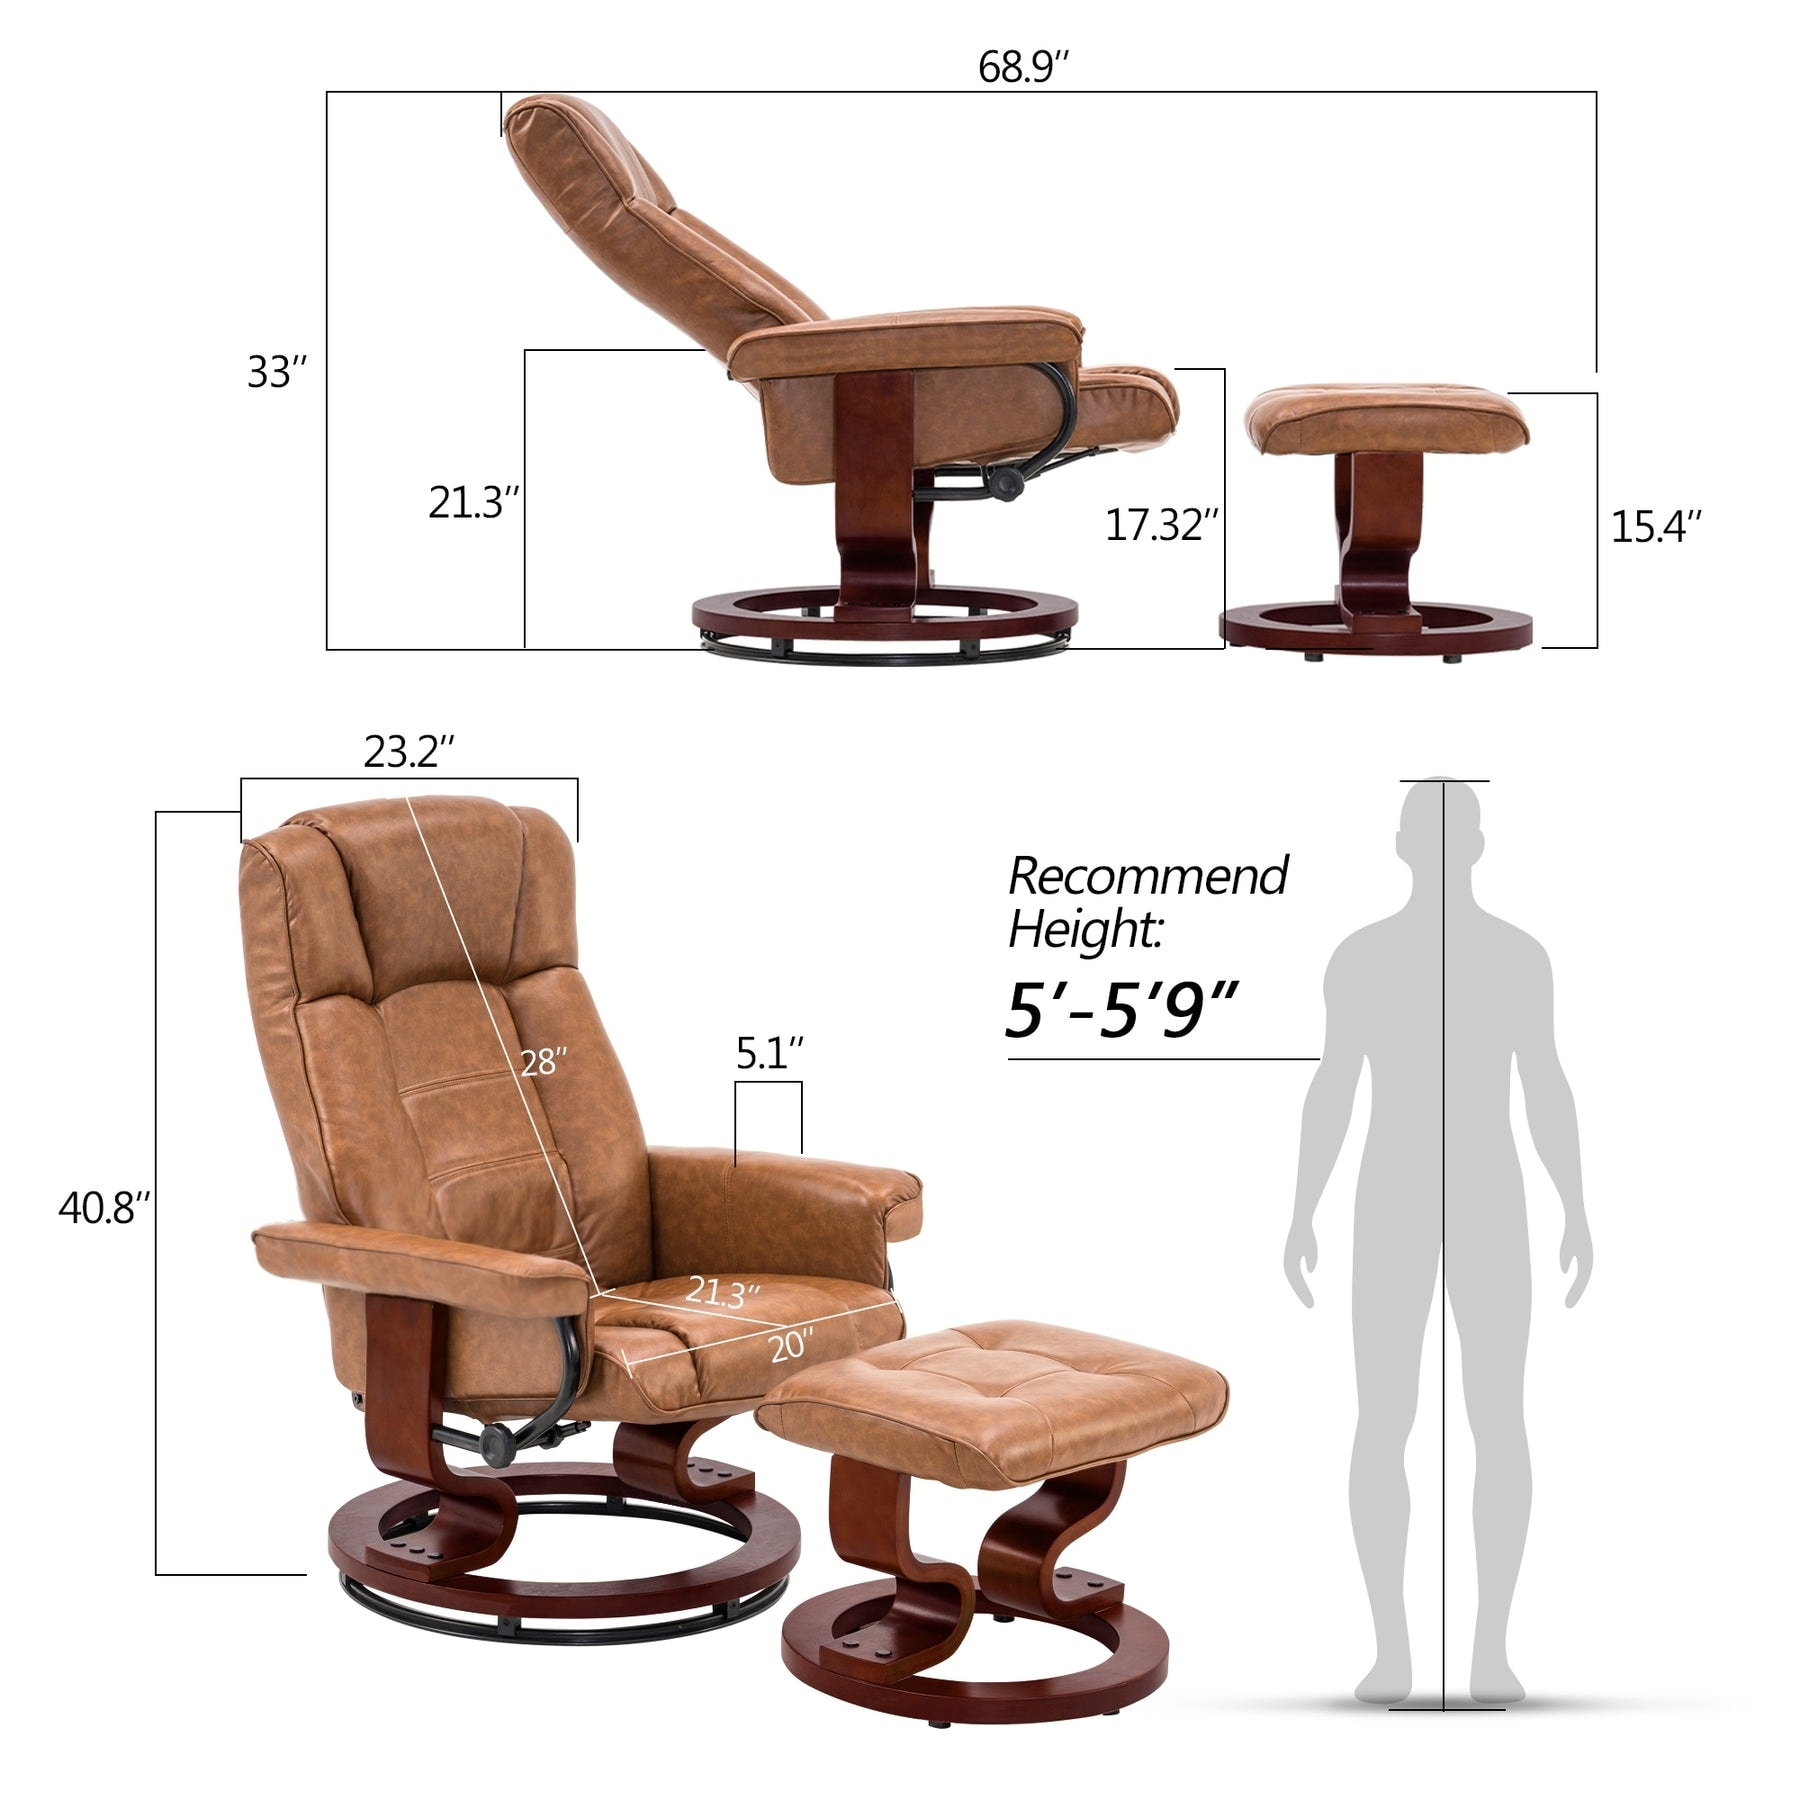 https://ak1.ostkcdn.com/images/products/is/images/direct/191ef20aa4b359f4607347d5616b6973afea5109/Mcombo-Swiveling-Recliner-Chair-with-Wood-Base-and-Ottoman.jpg